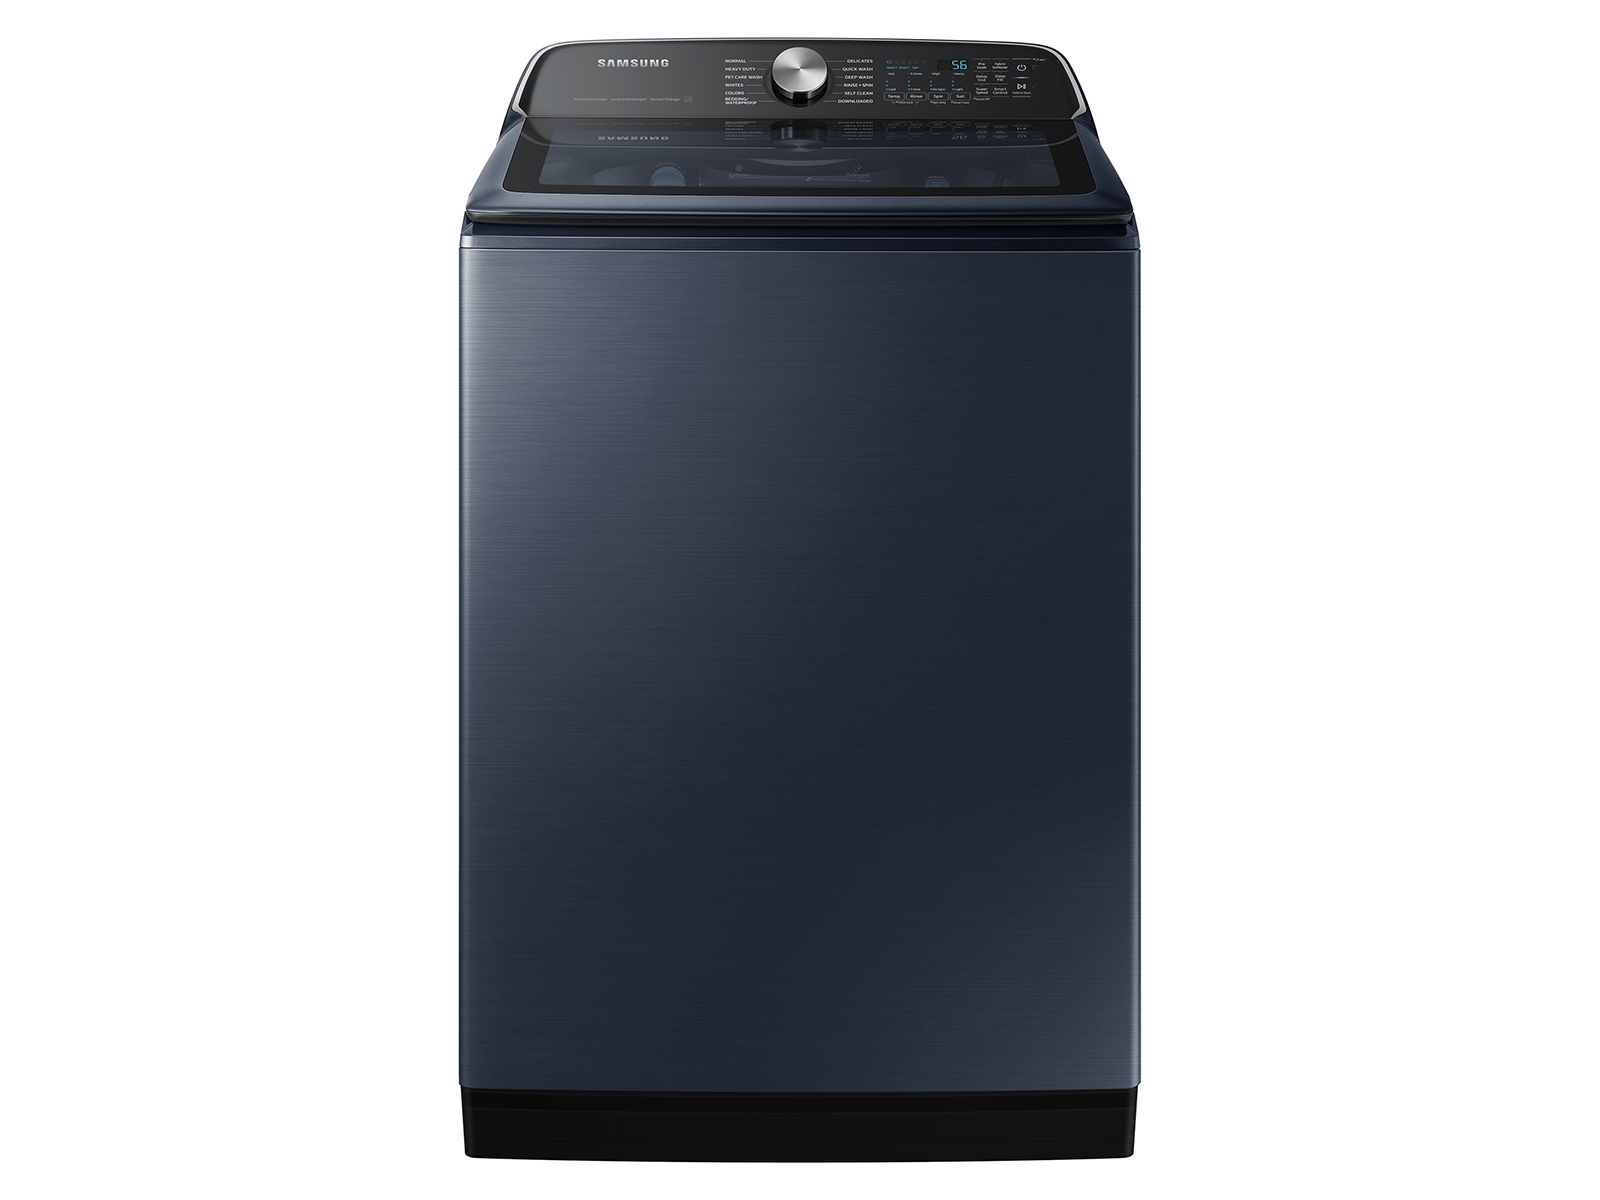 Samsung 5.4 cu. ft. Smart Top Load Washer with Pet Care Solution and Super Speed Wash in Brushed Navy Blue(WA54CG7150ADA4)